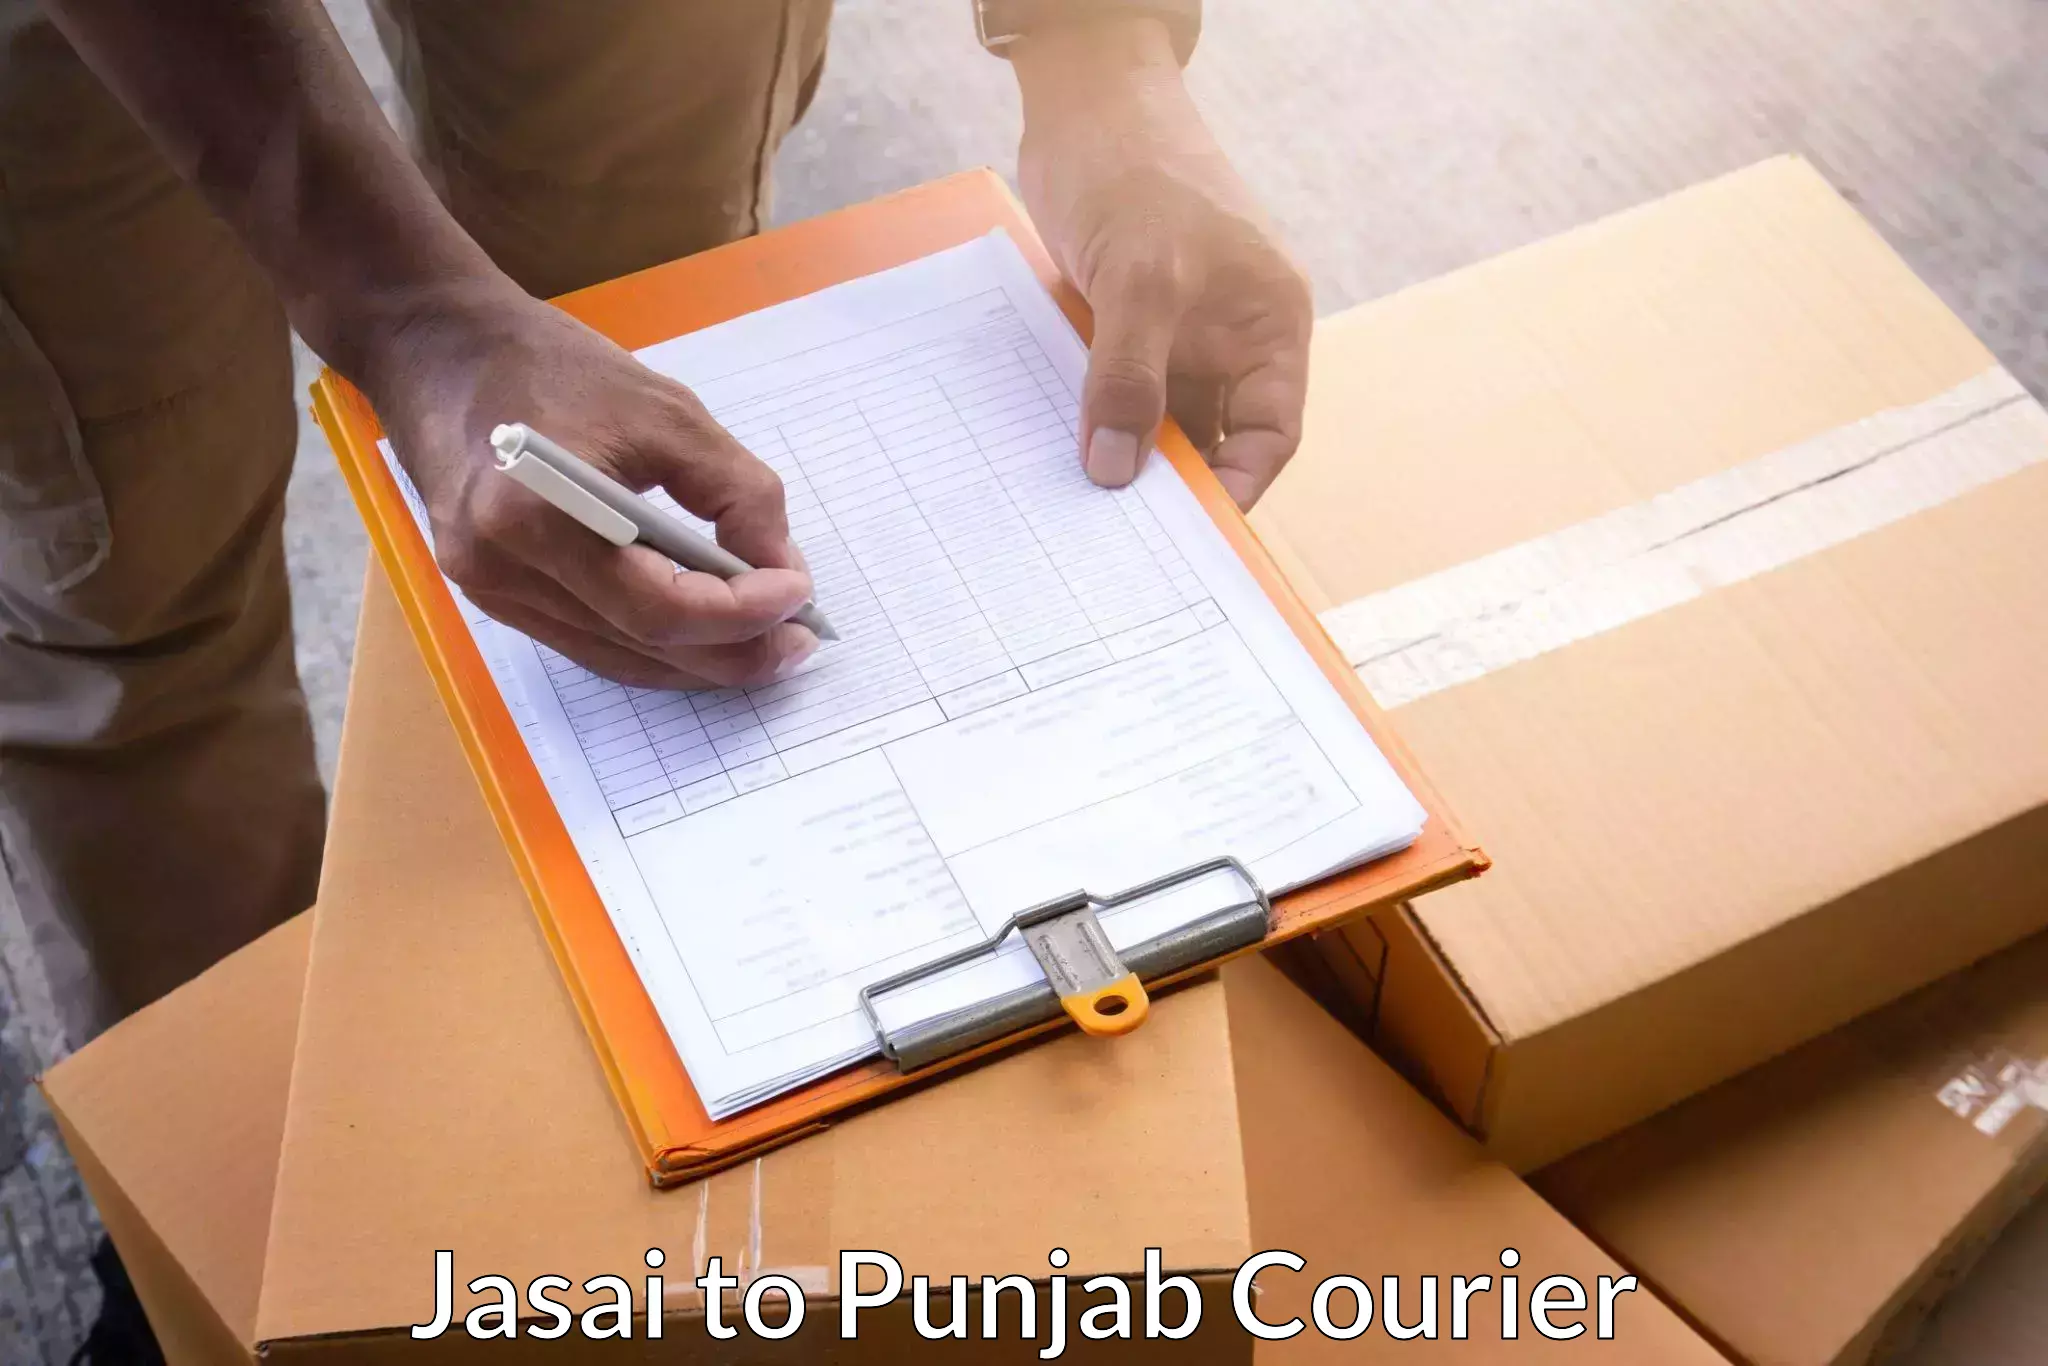 Personalized courier experiences Jasai to Punjab